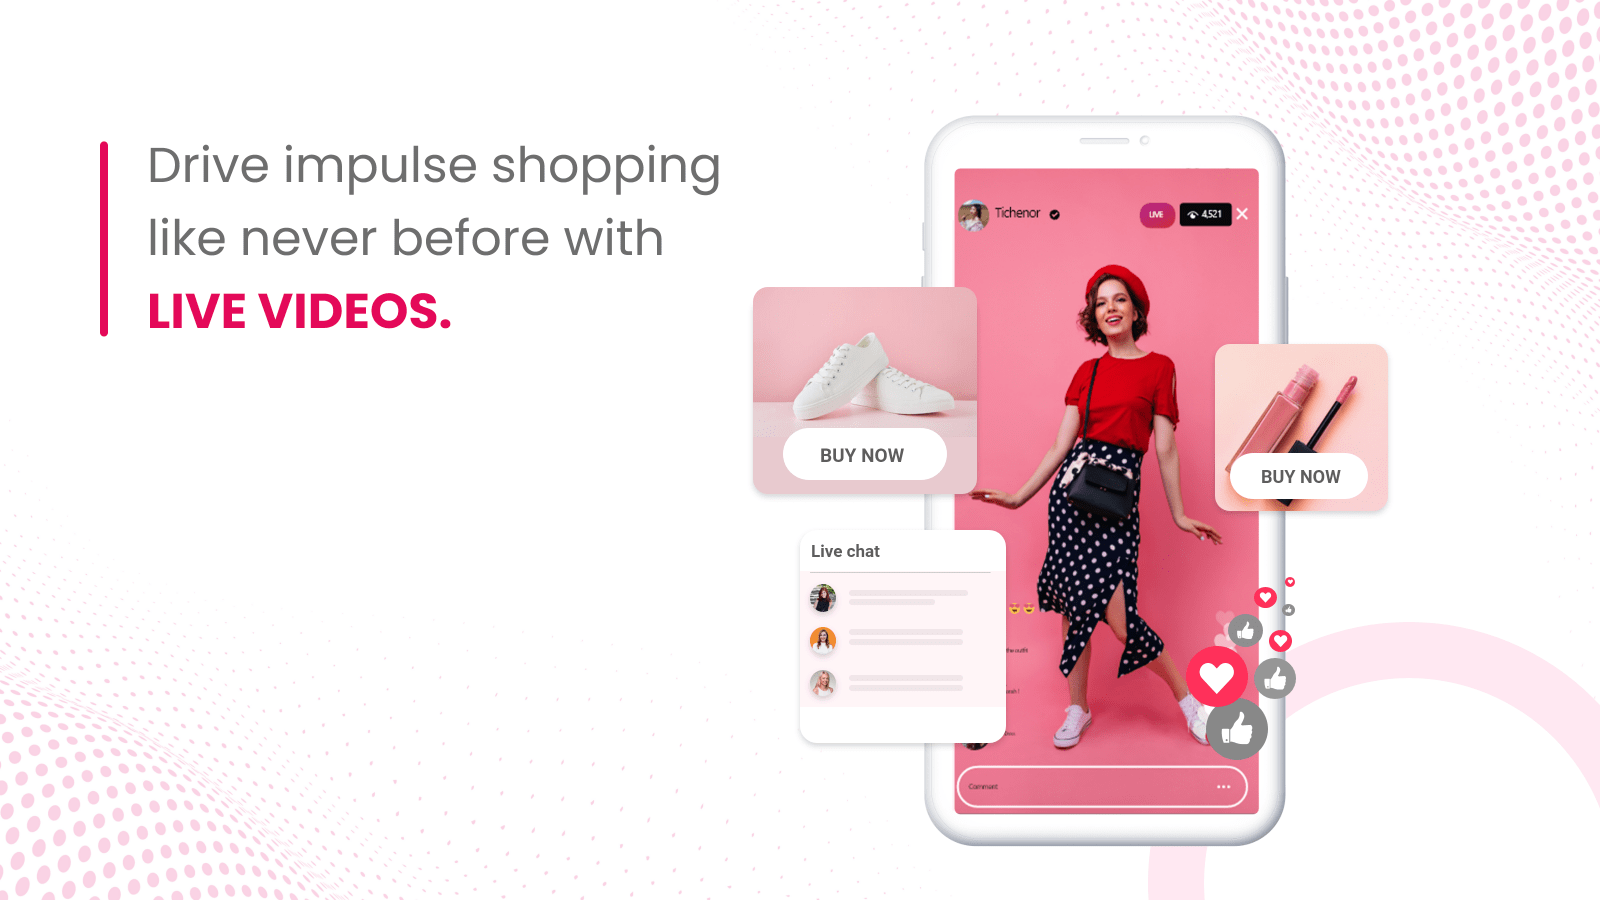 Drive impulse shopping like never before with live videos